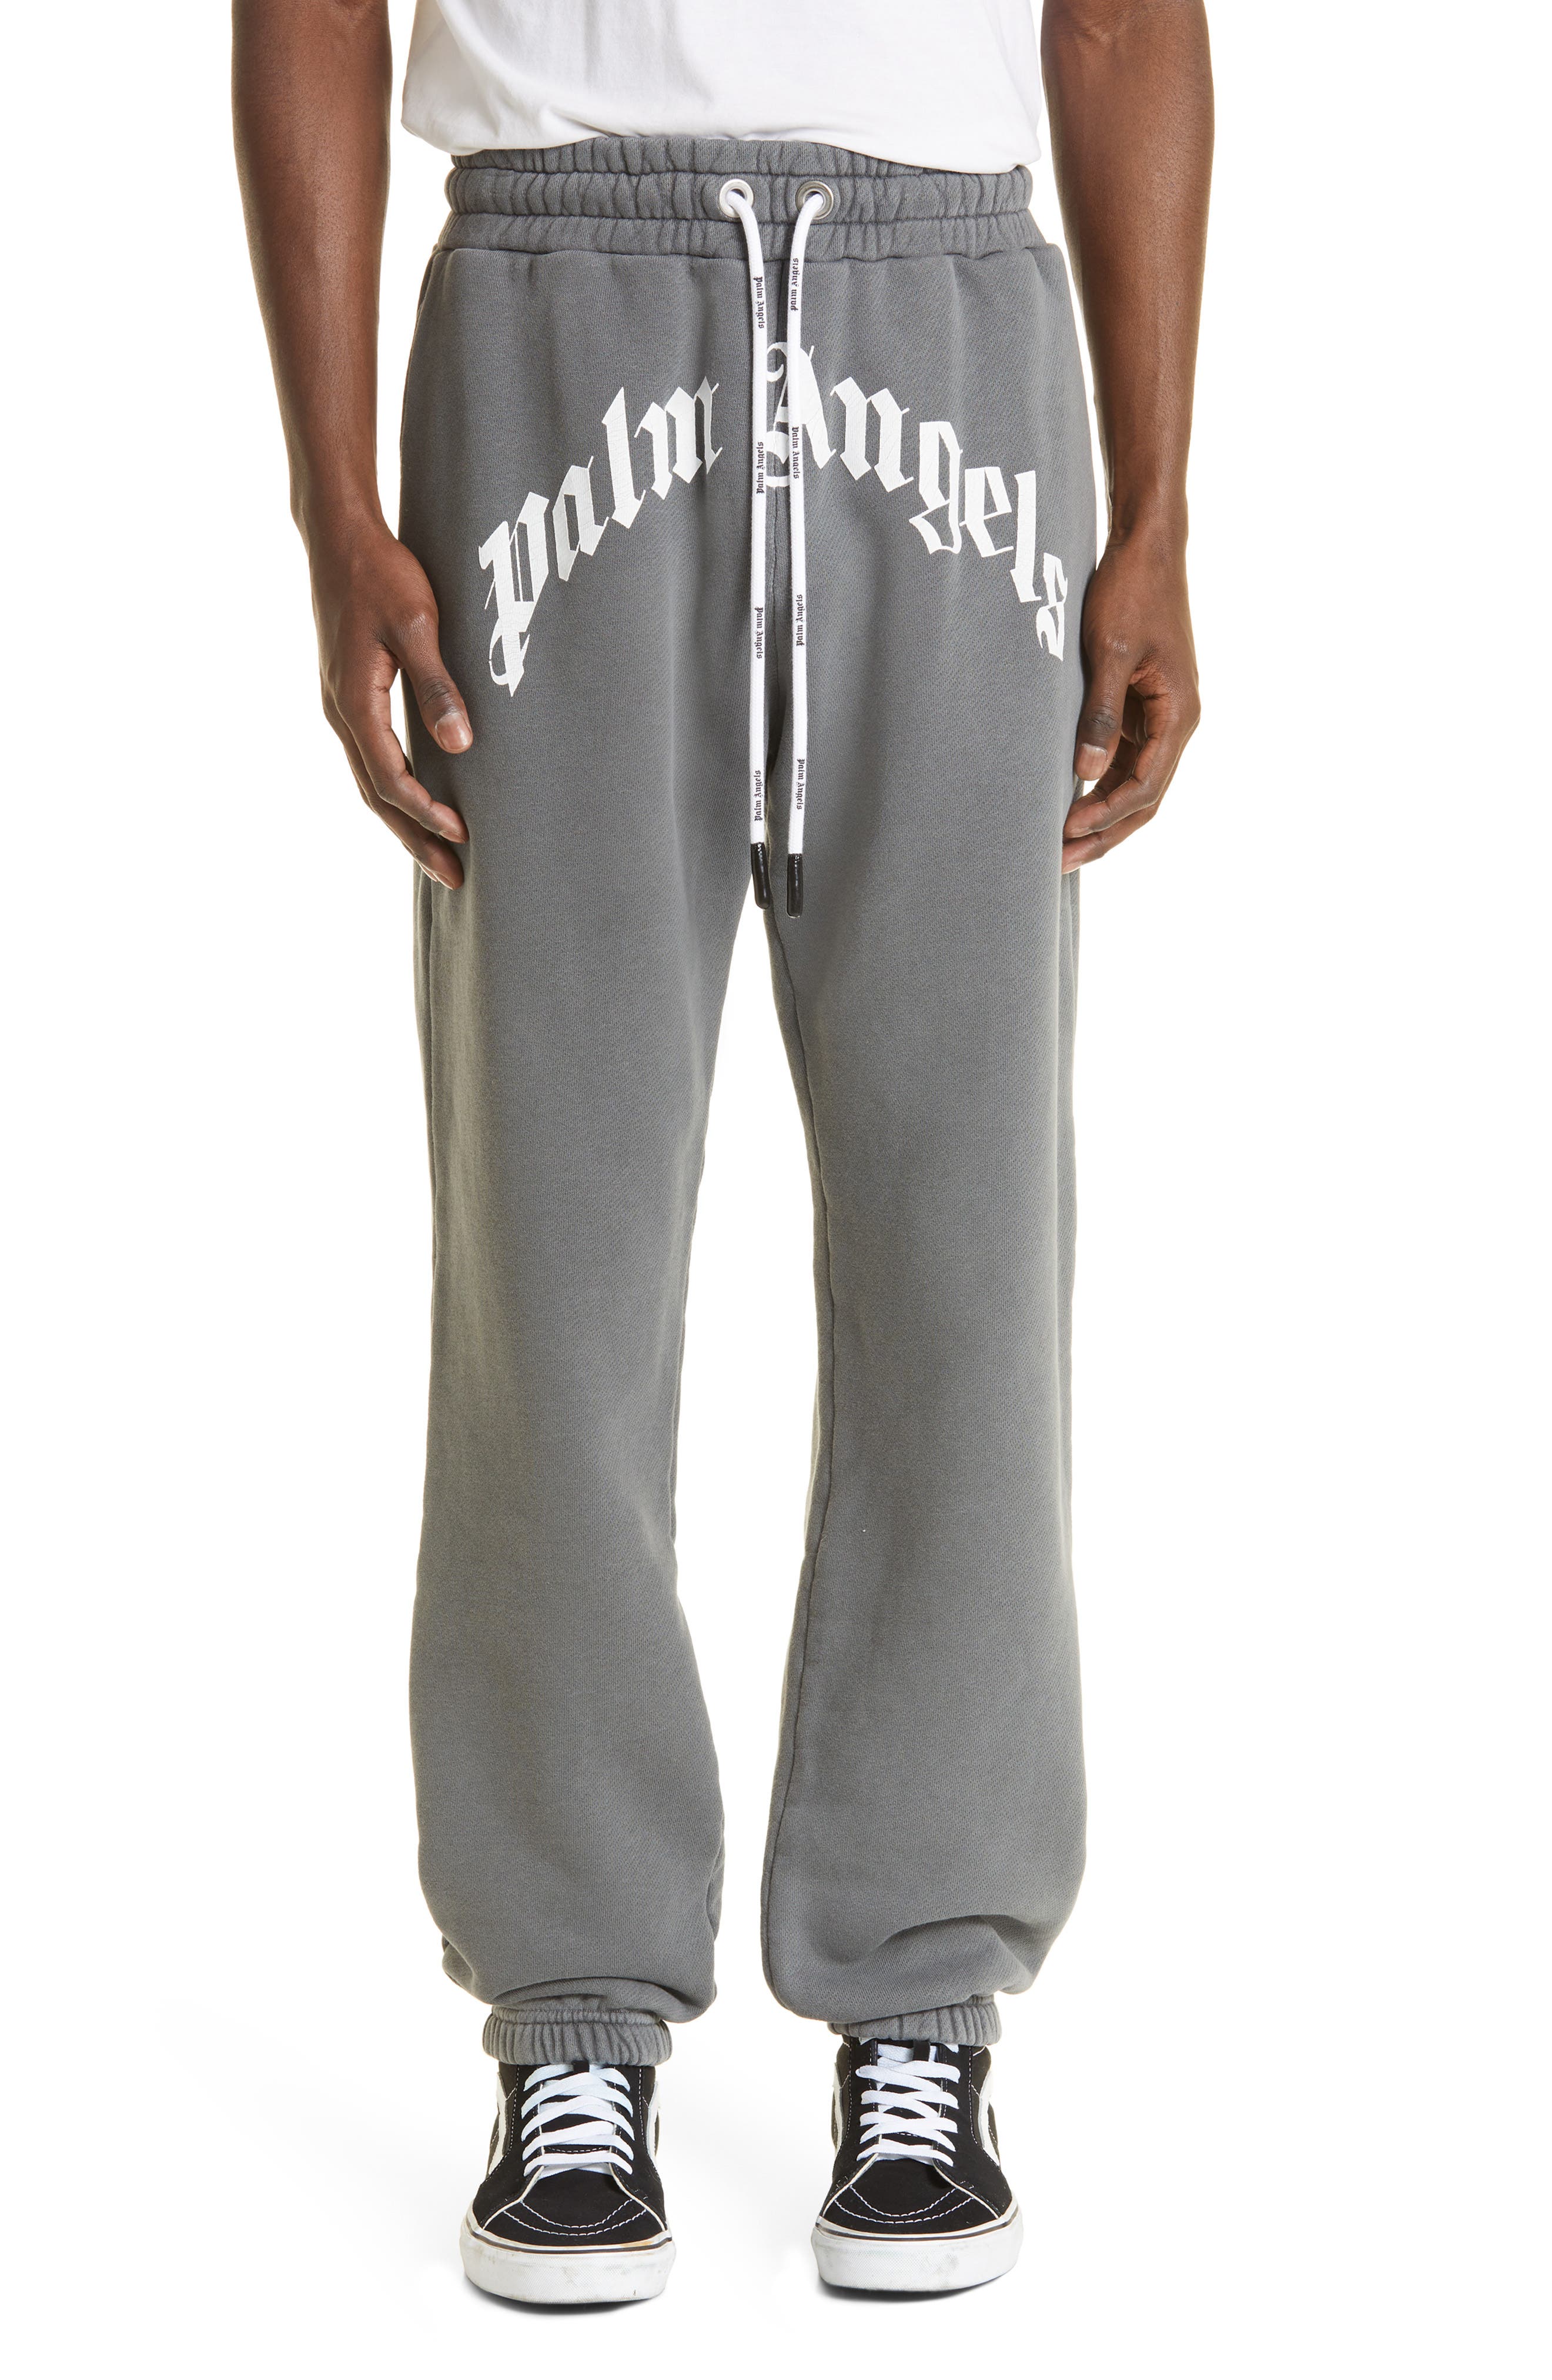 Palm Angels Curved Logo Cotton Sweatpants in Black/White